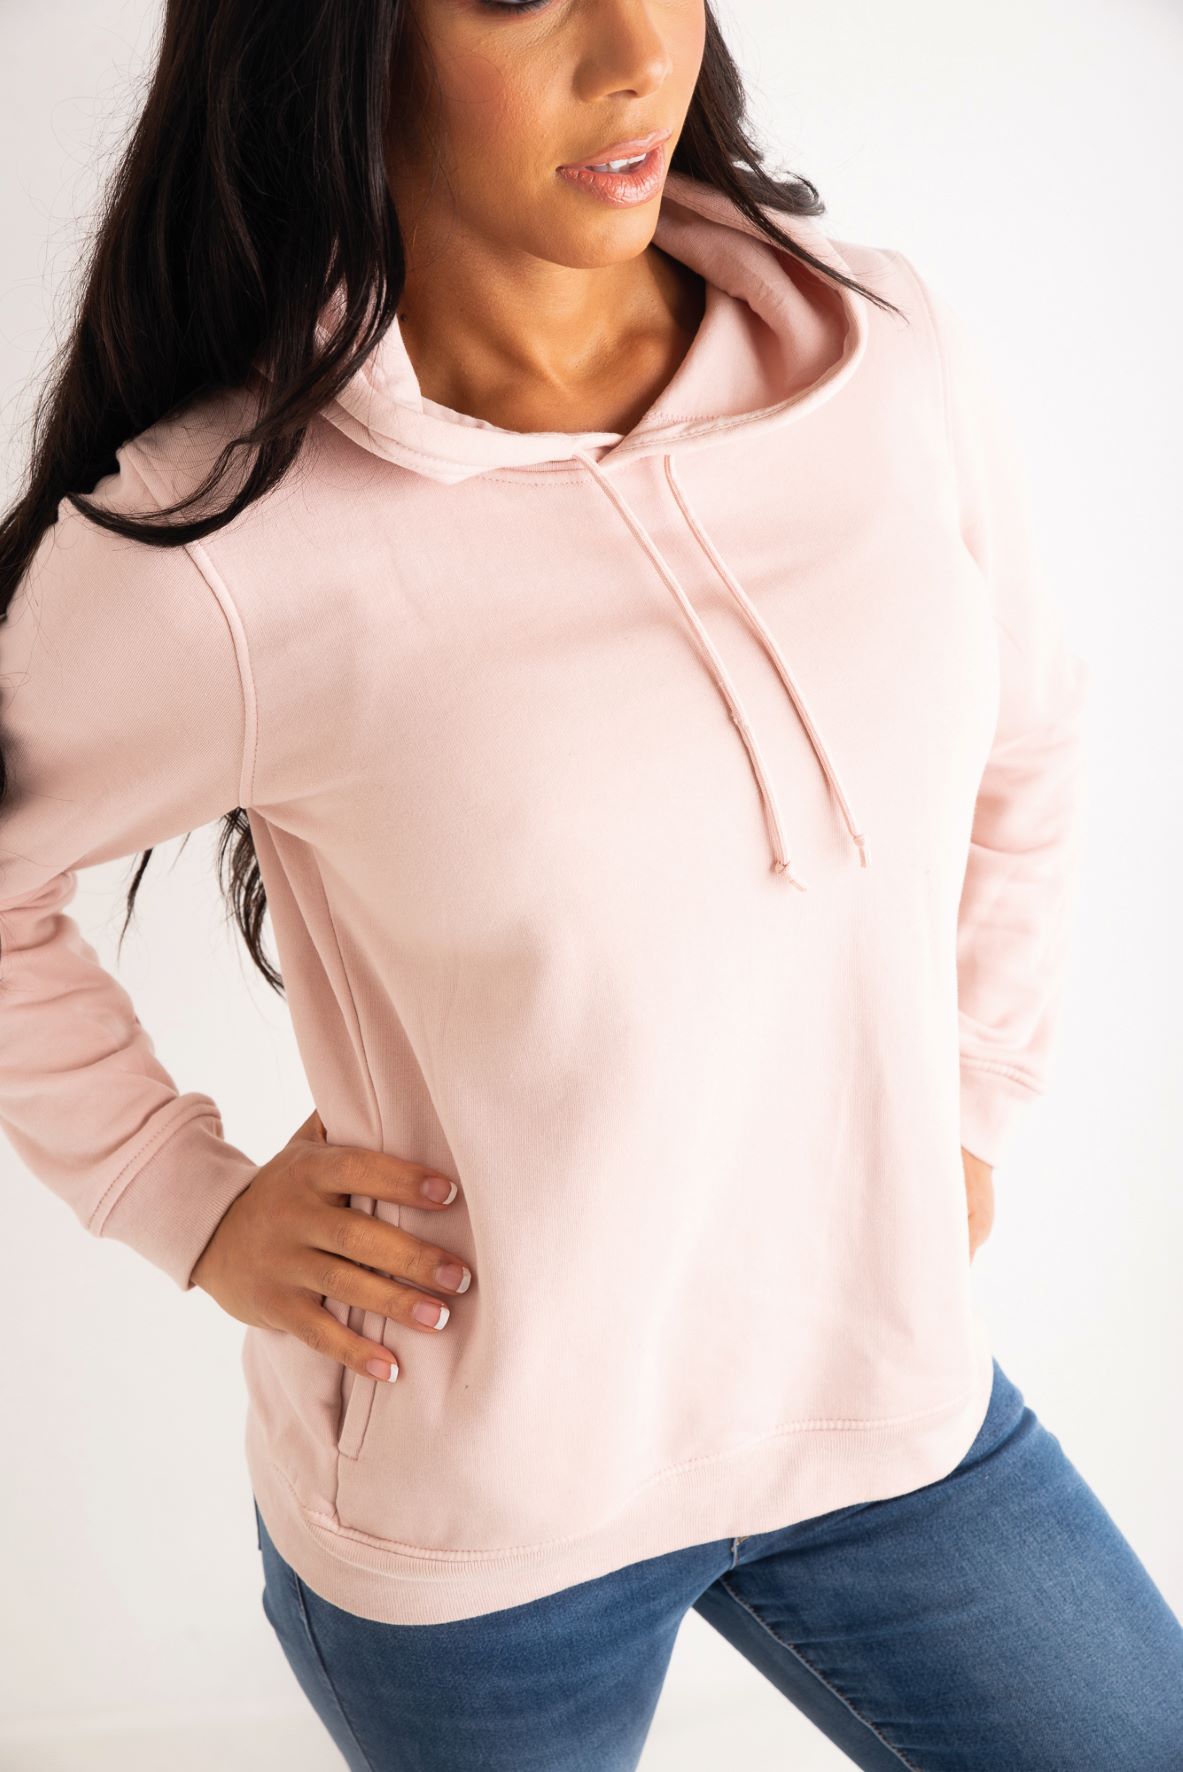 https://www.topsante.co.uk/wp-content/uploads/sites/8/Fairlie-Curved-Pale-Pink-Hoodie-39.99-Fairliecurved.com_.jpg